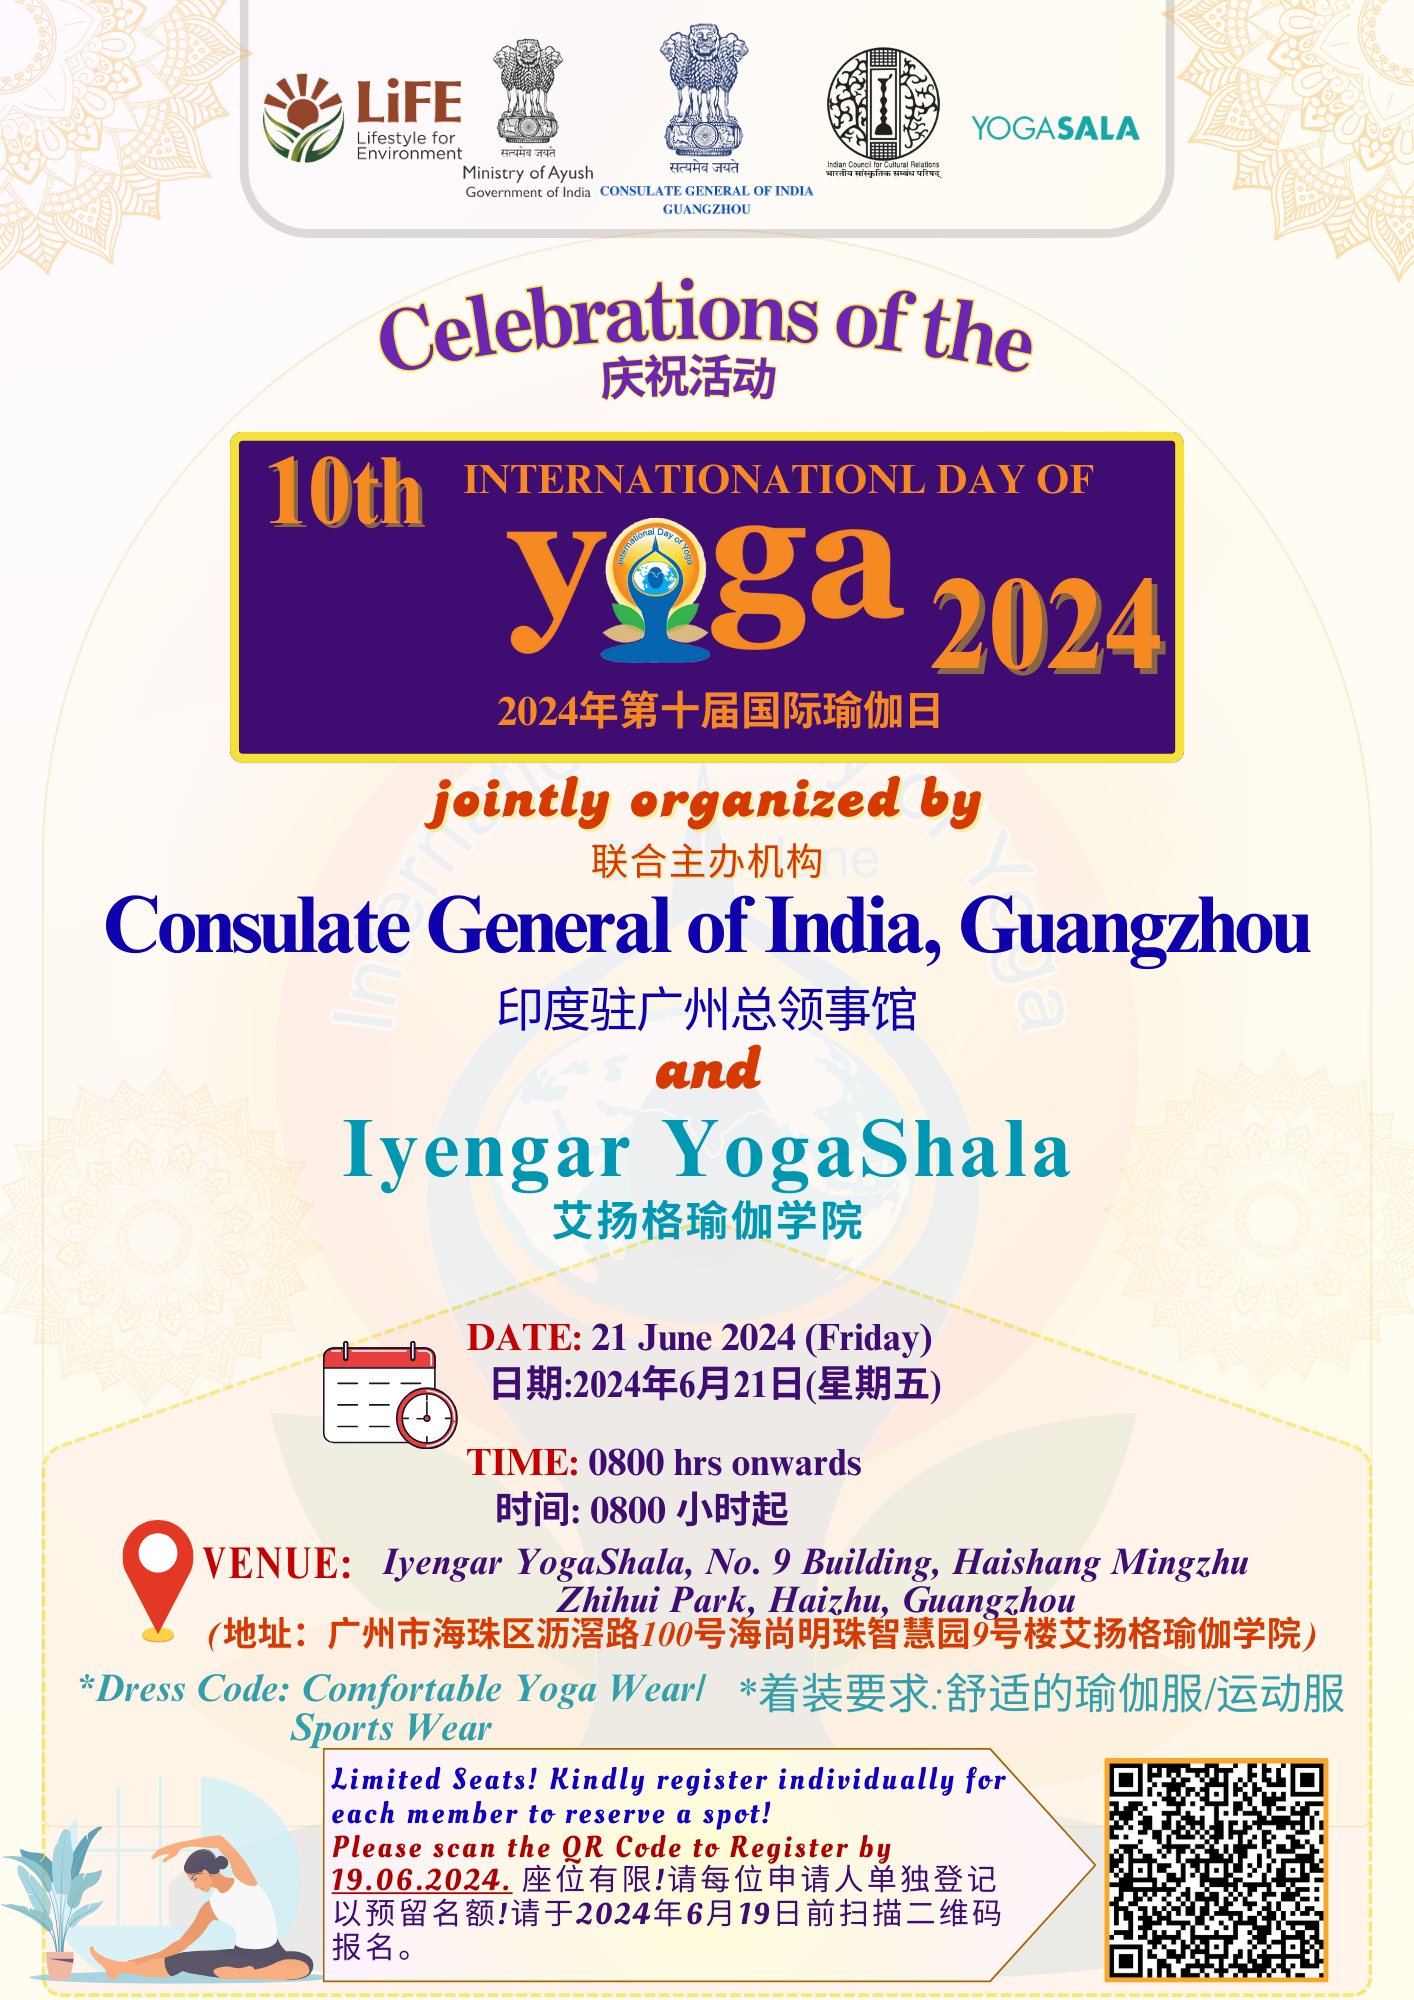 Invitation to attend the Celebrations of the 10th International Day of Yoga - 2024